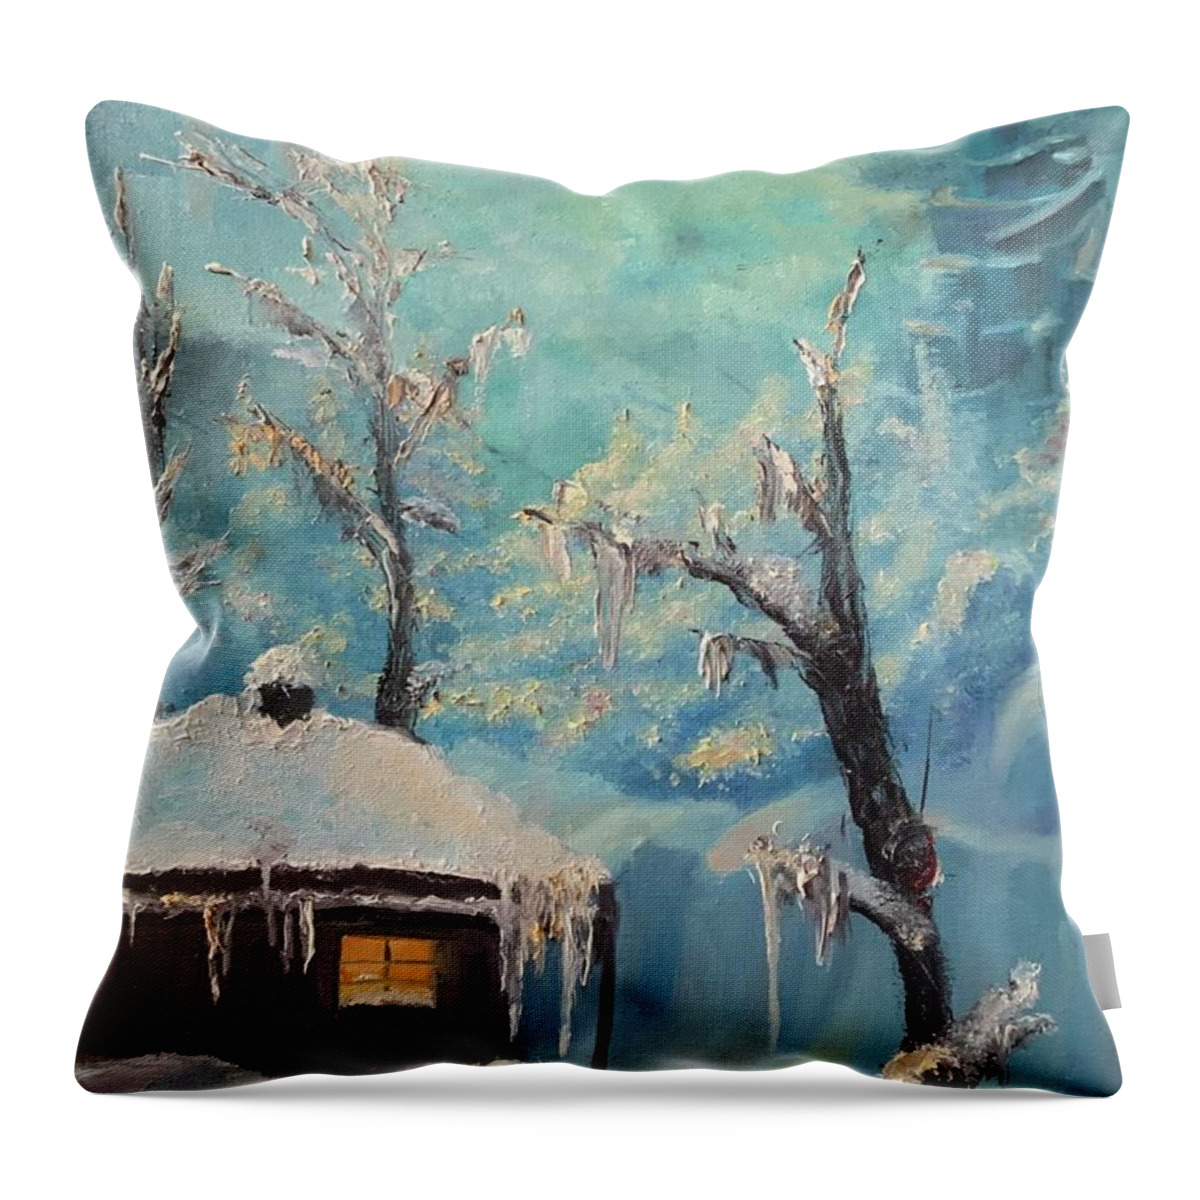 Moon Throw Pillow featuring the painting Frosty Tales by Medea Ioseliani